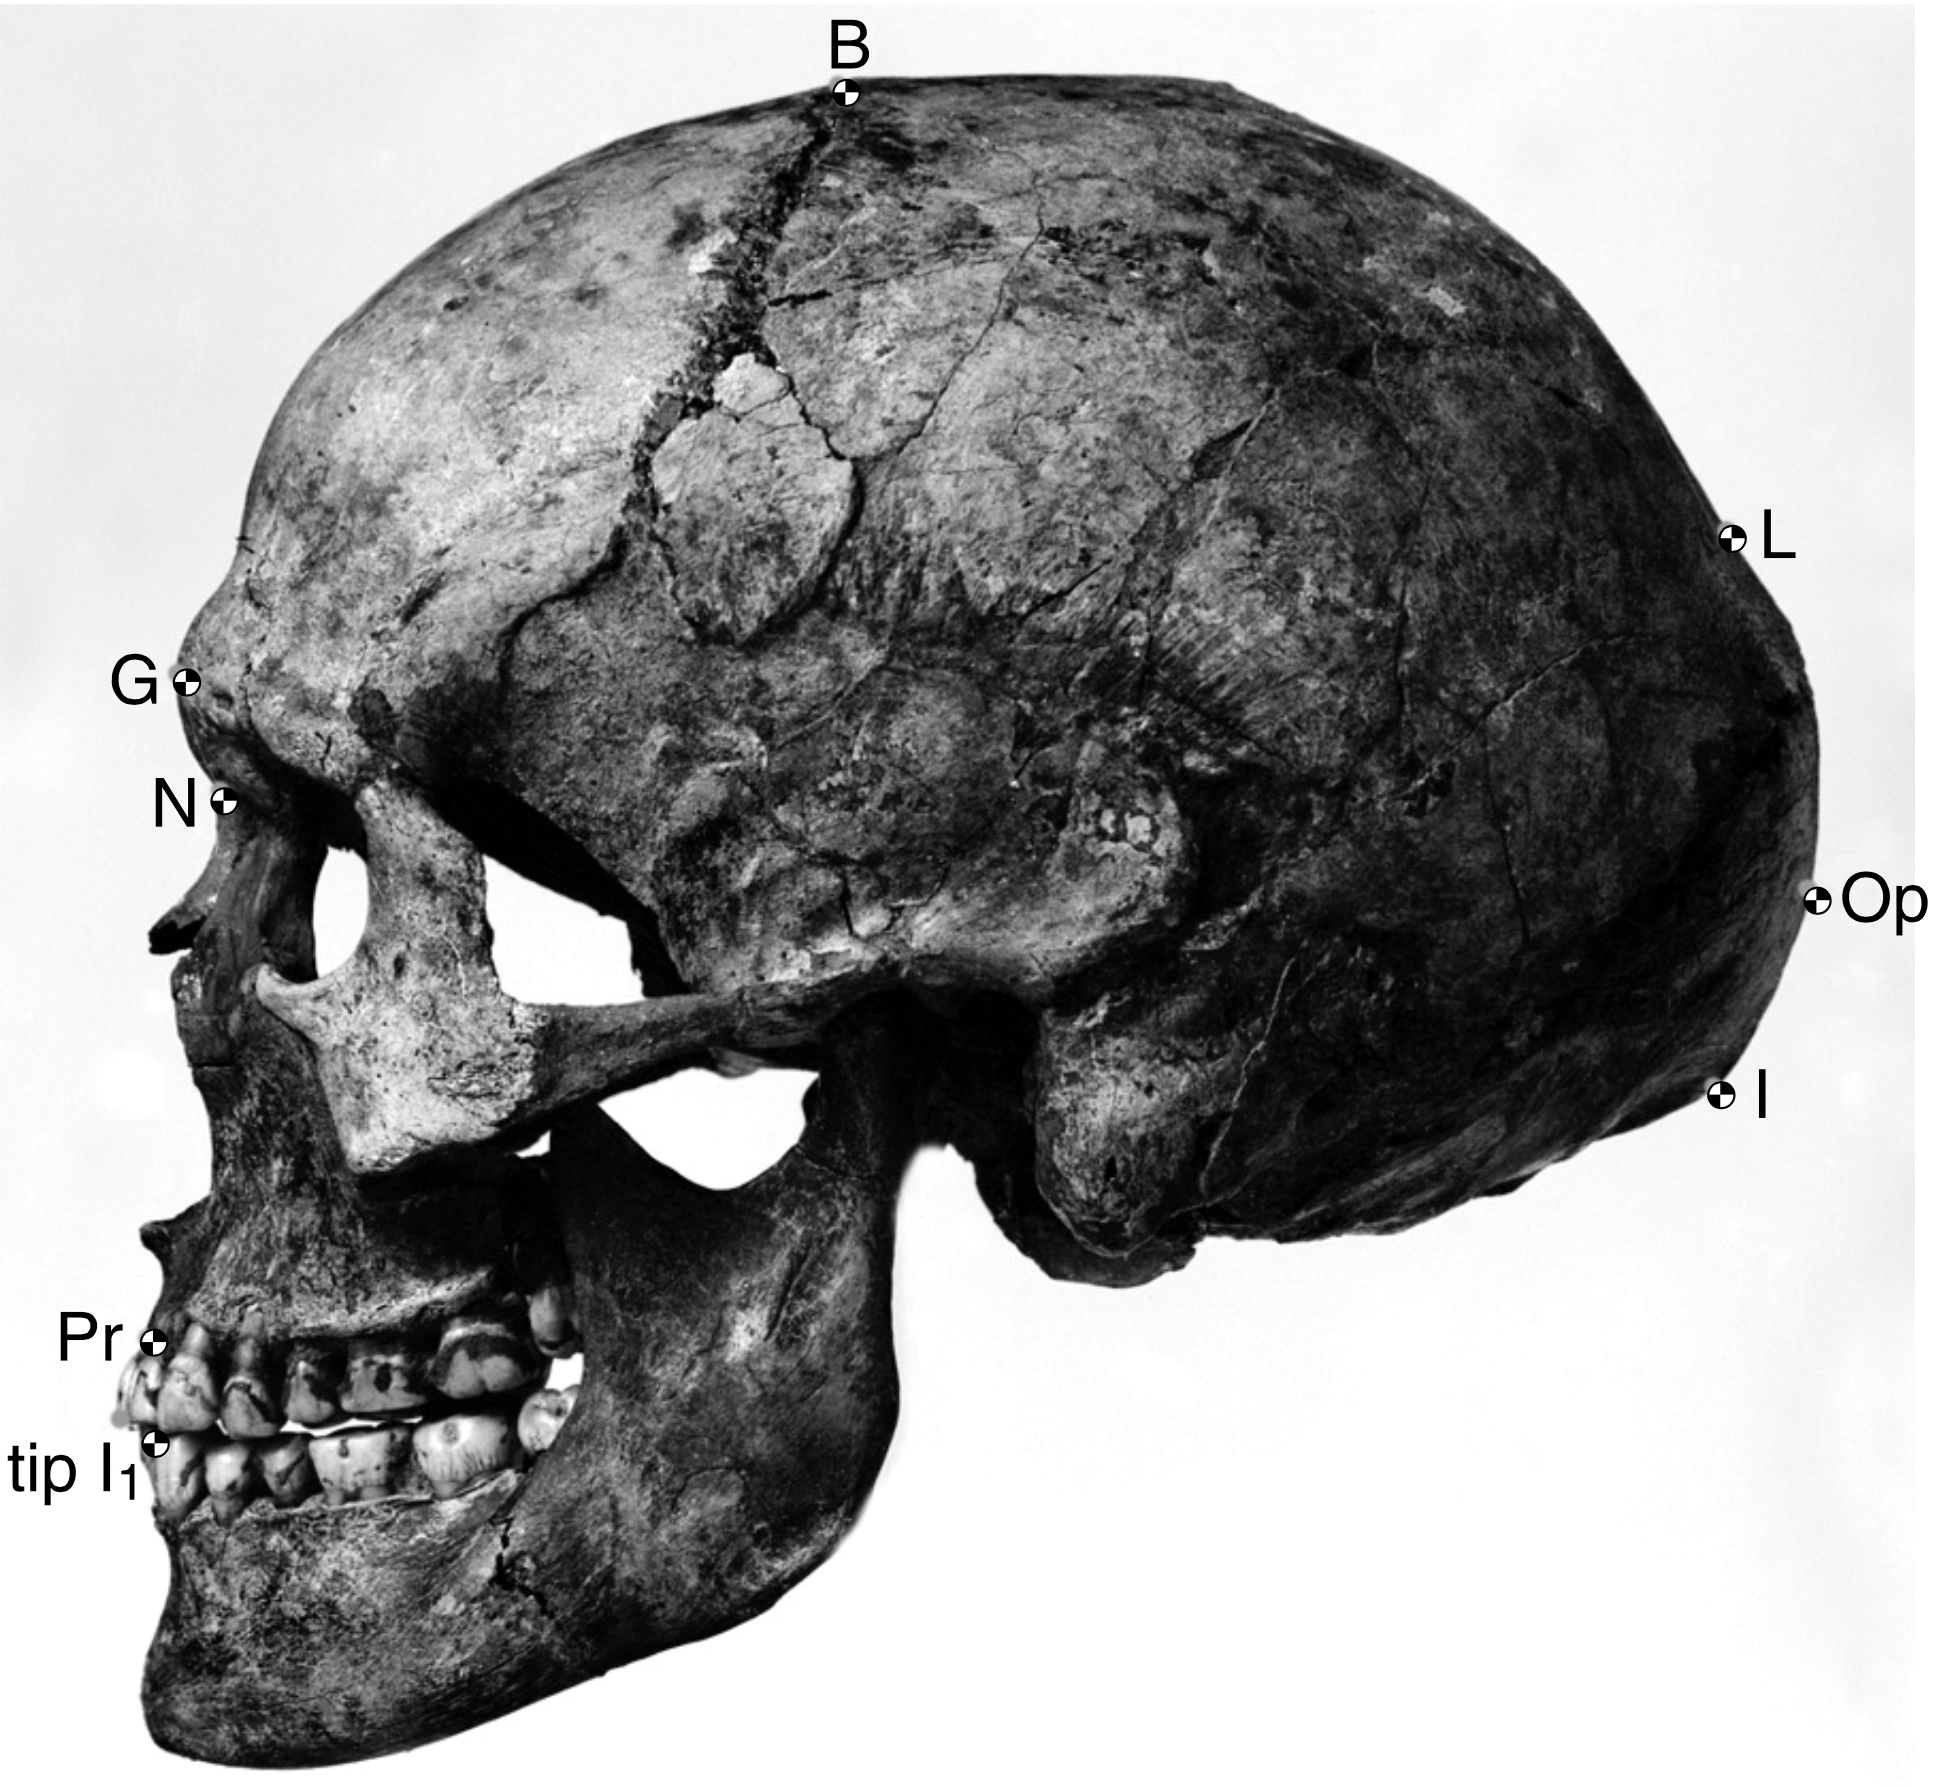 Black-and-white photograph of a human skull with labeled cranial landmarks.